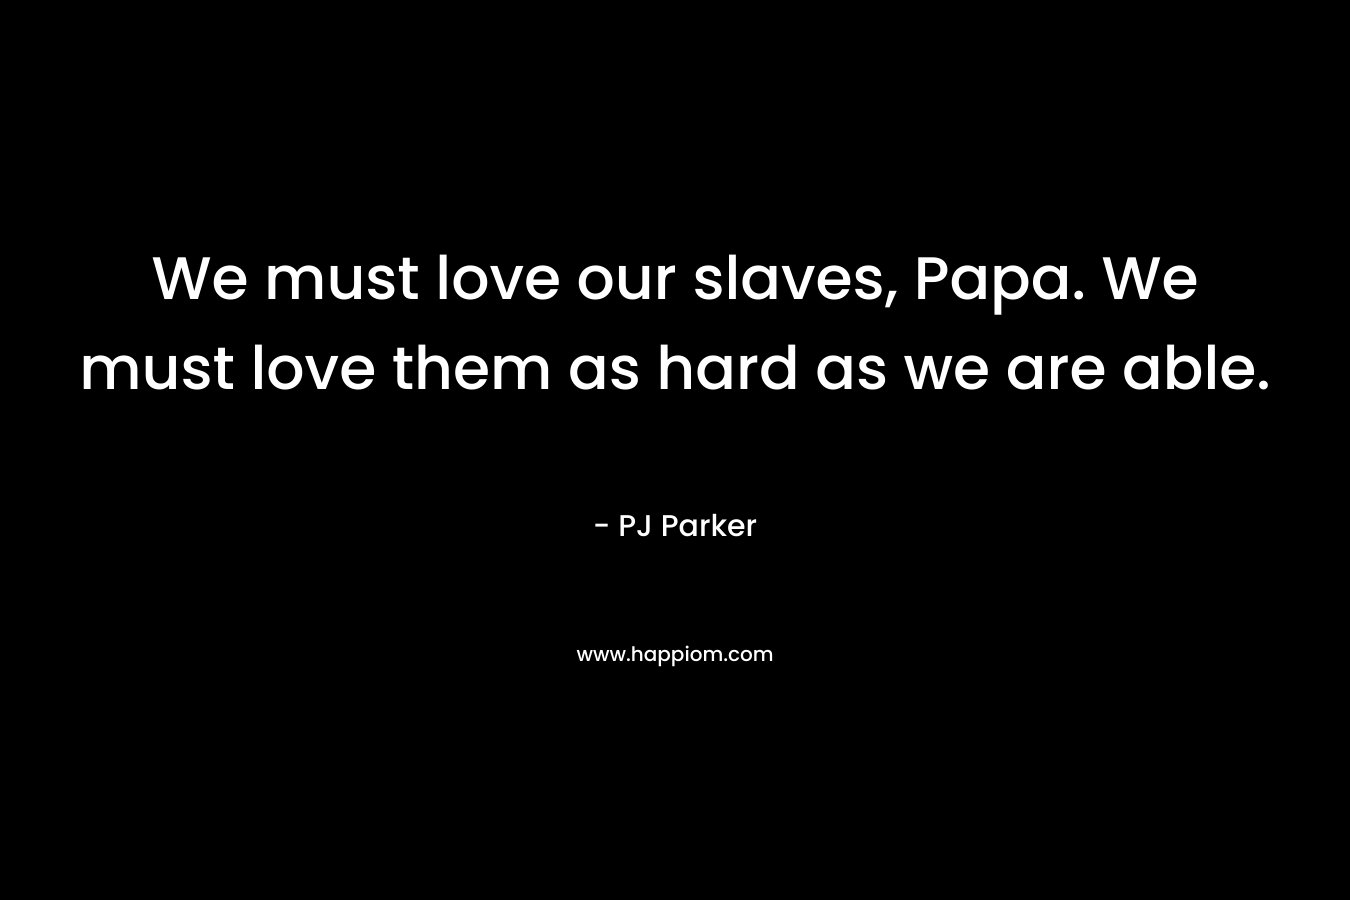 We must love our slaves, Papa. We must love them as hard as we are able. – PJ Parker